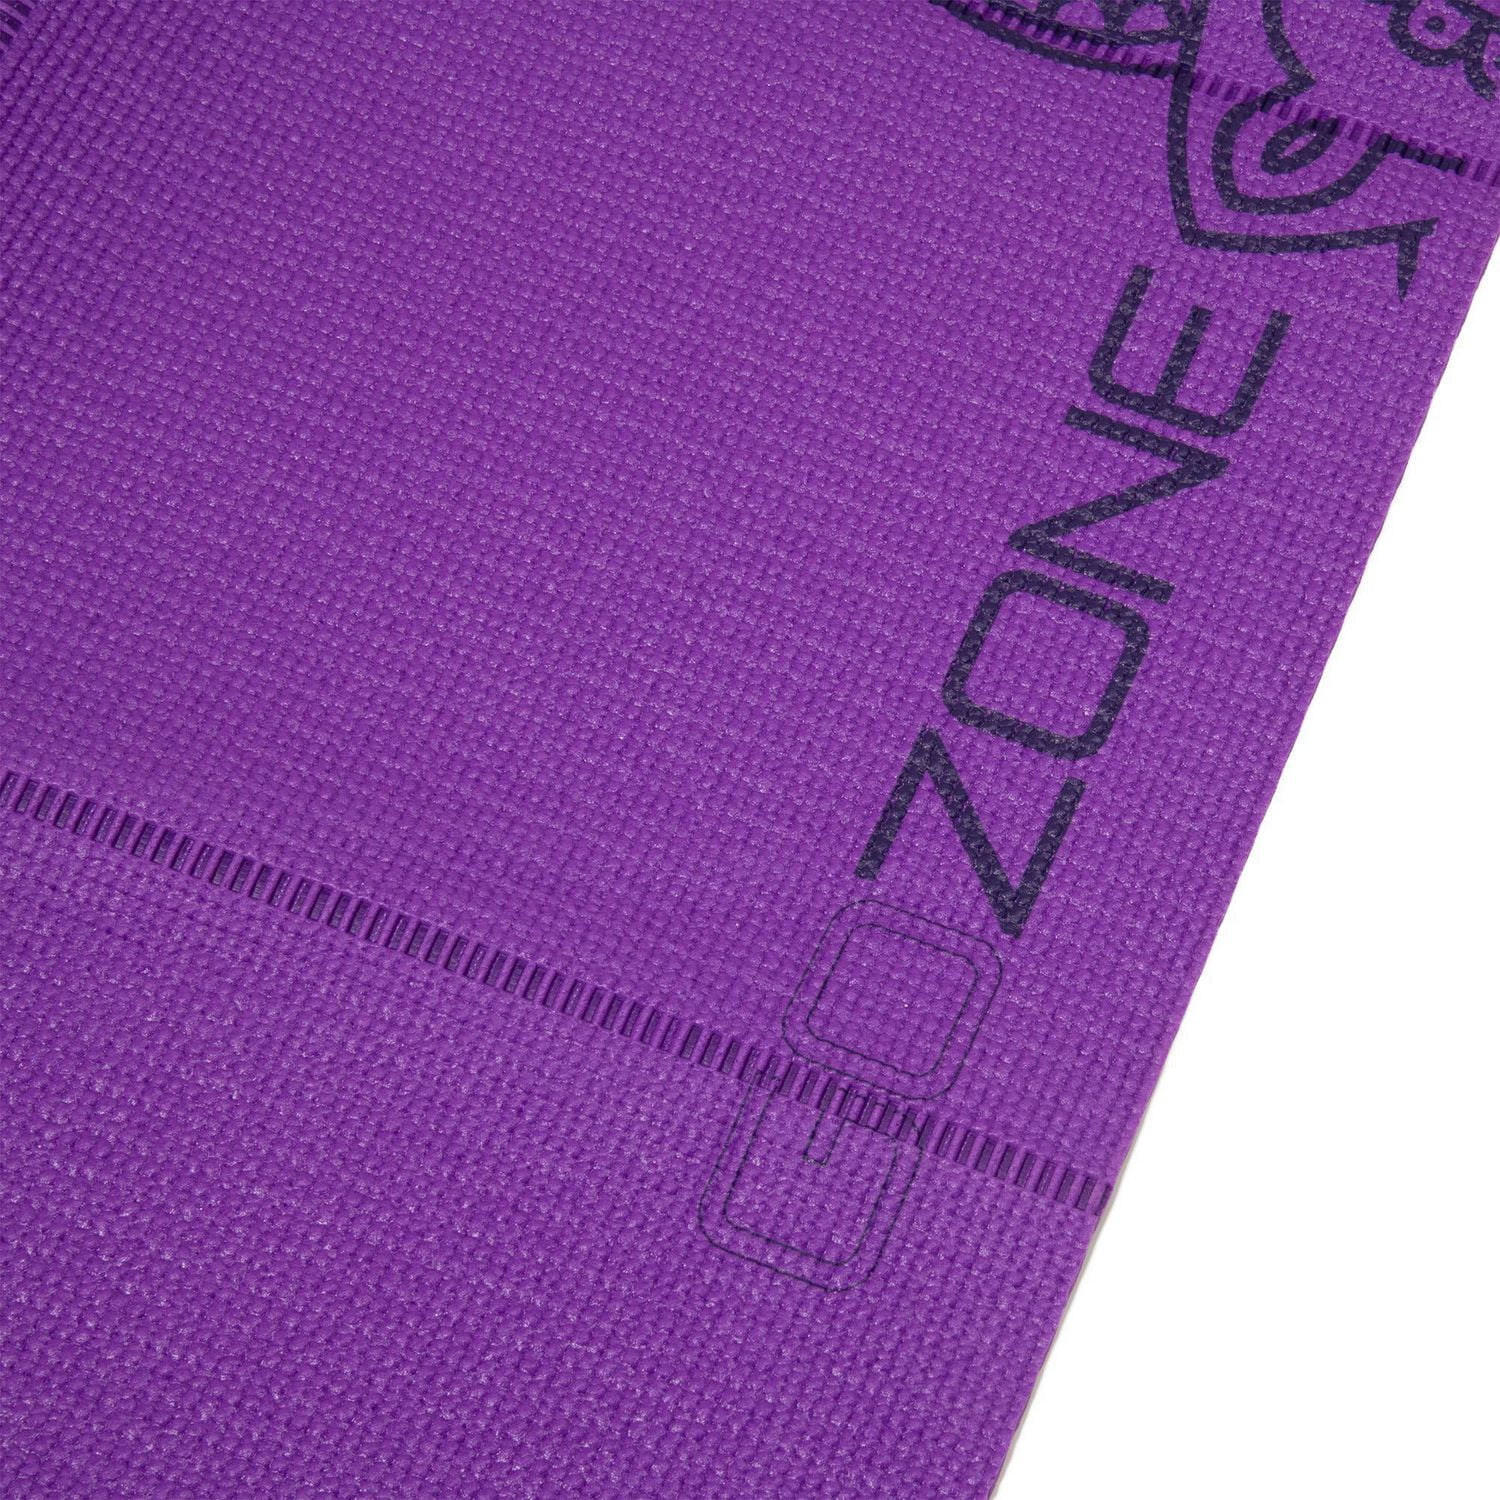 Yoga Mat, 5 mm thick, 185 x 61 cm, with Strap, Foam - Purple, For Soft Yoga